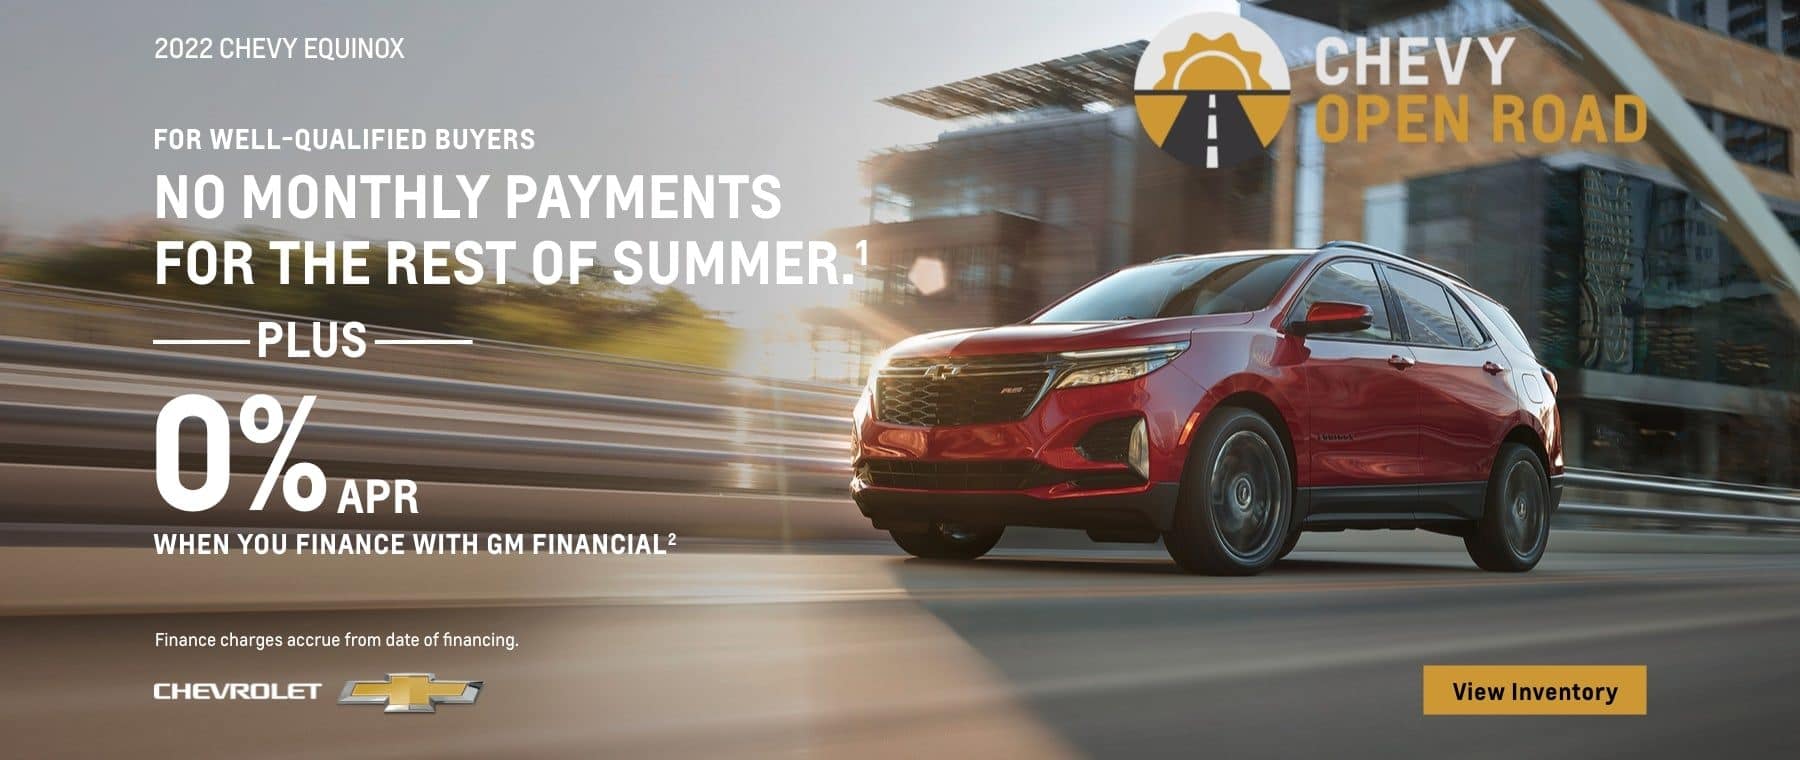 2022 Chevy Equinox. Chevy Open Road. For well-qualified buyers. No monthly payments for the rest of summer. Plus, 0% APR when you finance with GM Financial. Finance charges accrue from date of financing.